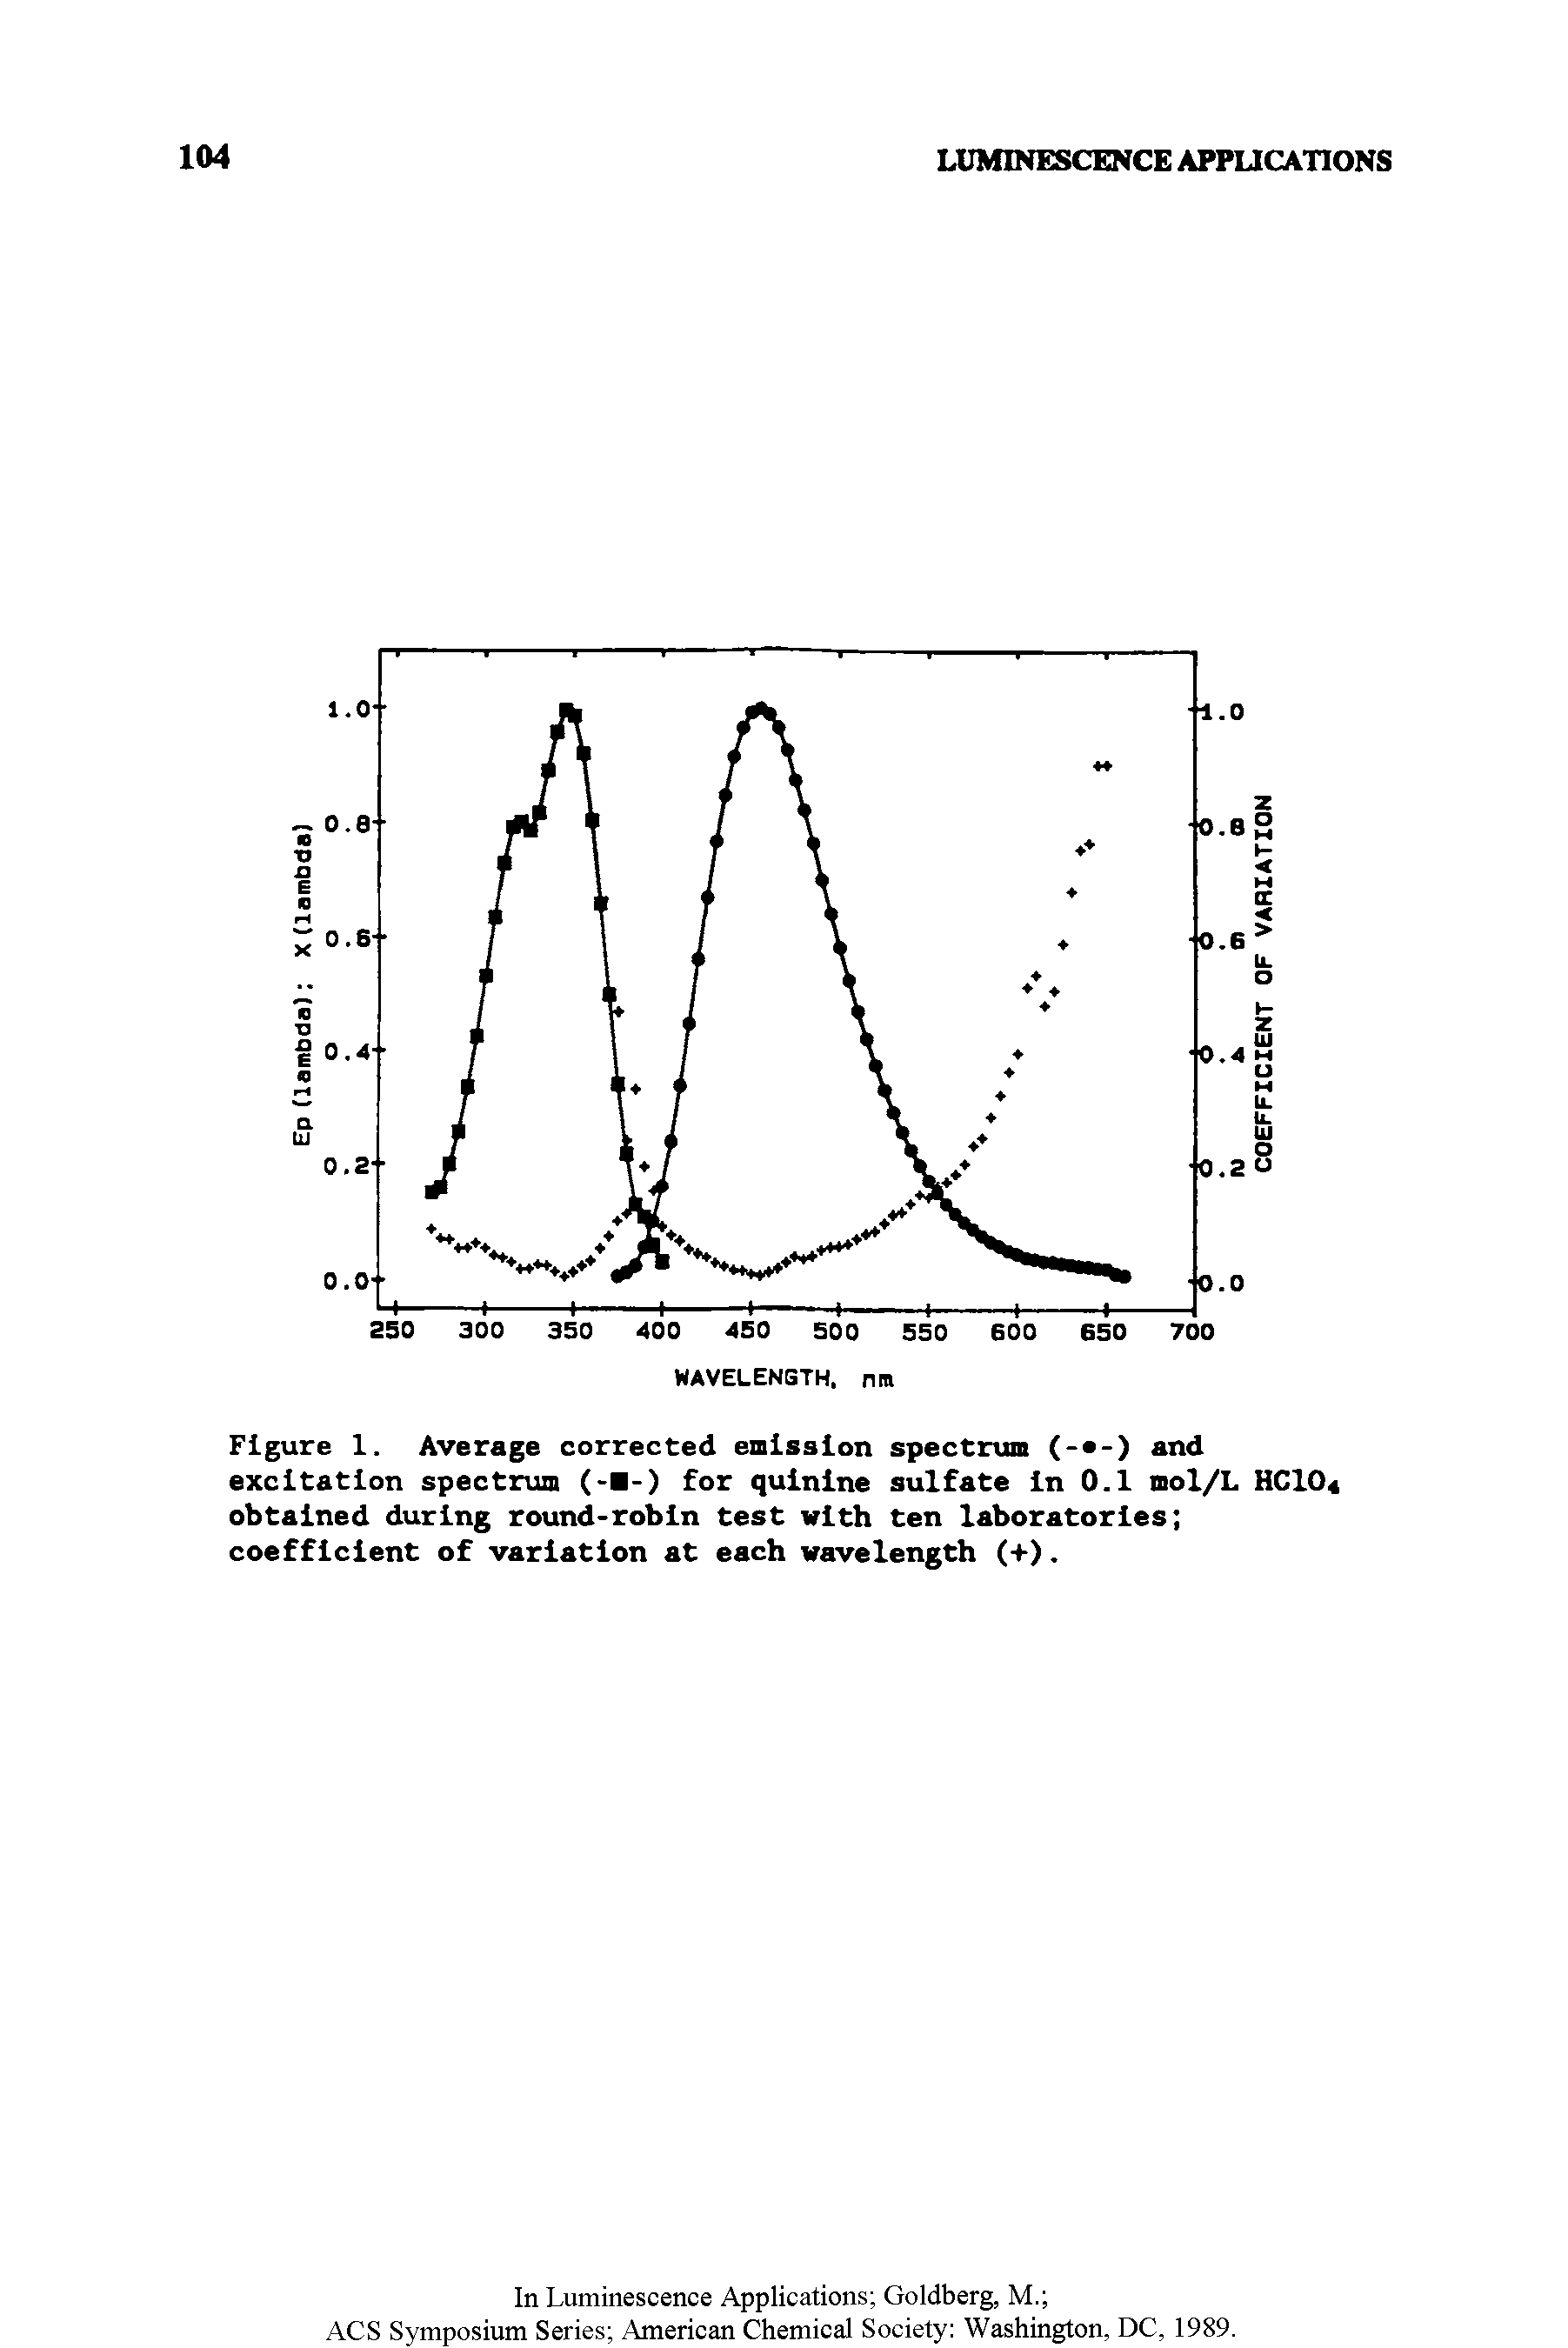 Figure 1. Average corrected emission spectrum (- -) and excitation spectrum (- -) for quinine sulfate In 0.1 mol/L HC10 obtained during round-robin test with ten laboratories coefficient of variation at each wavelength (-t).